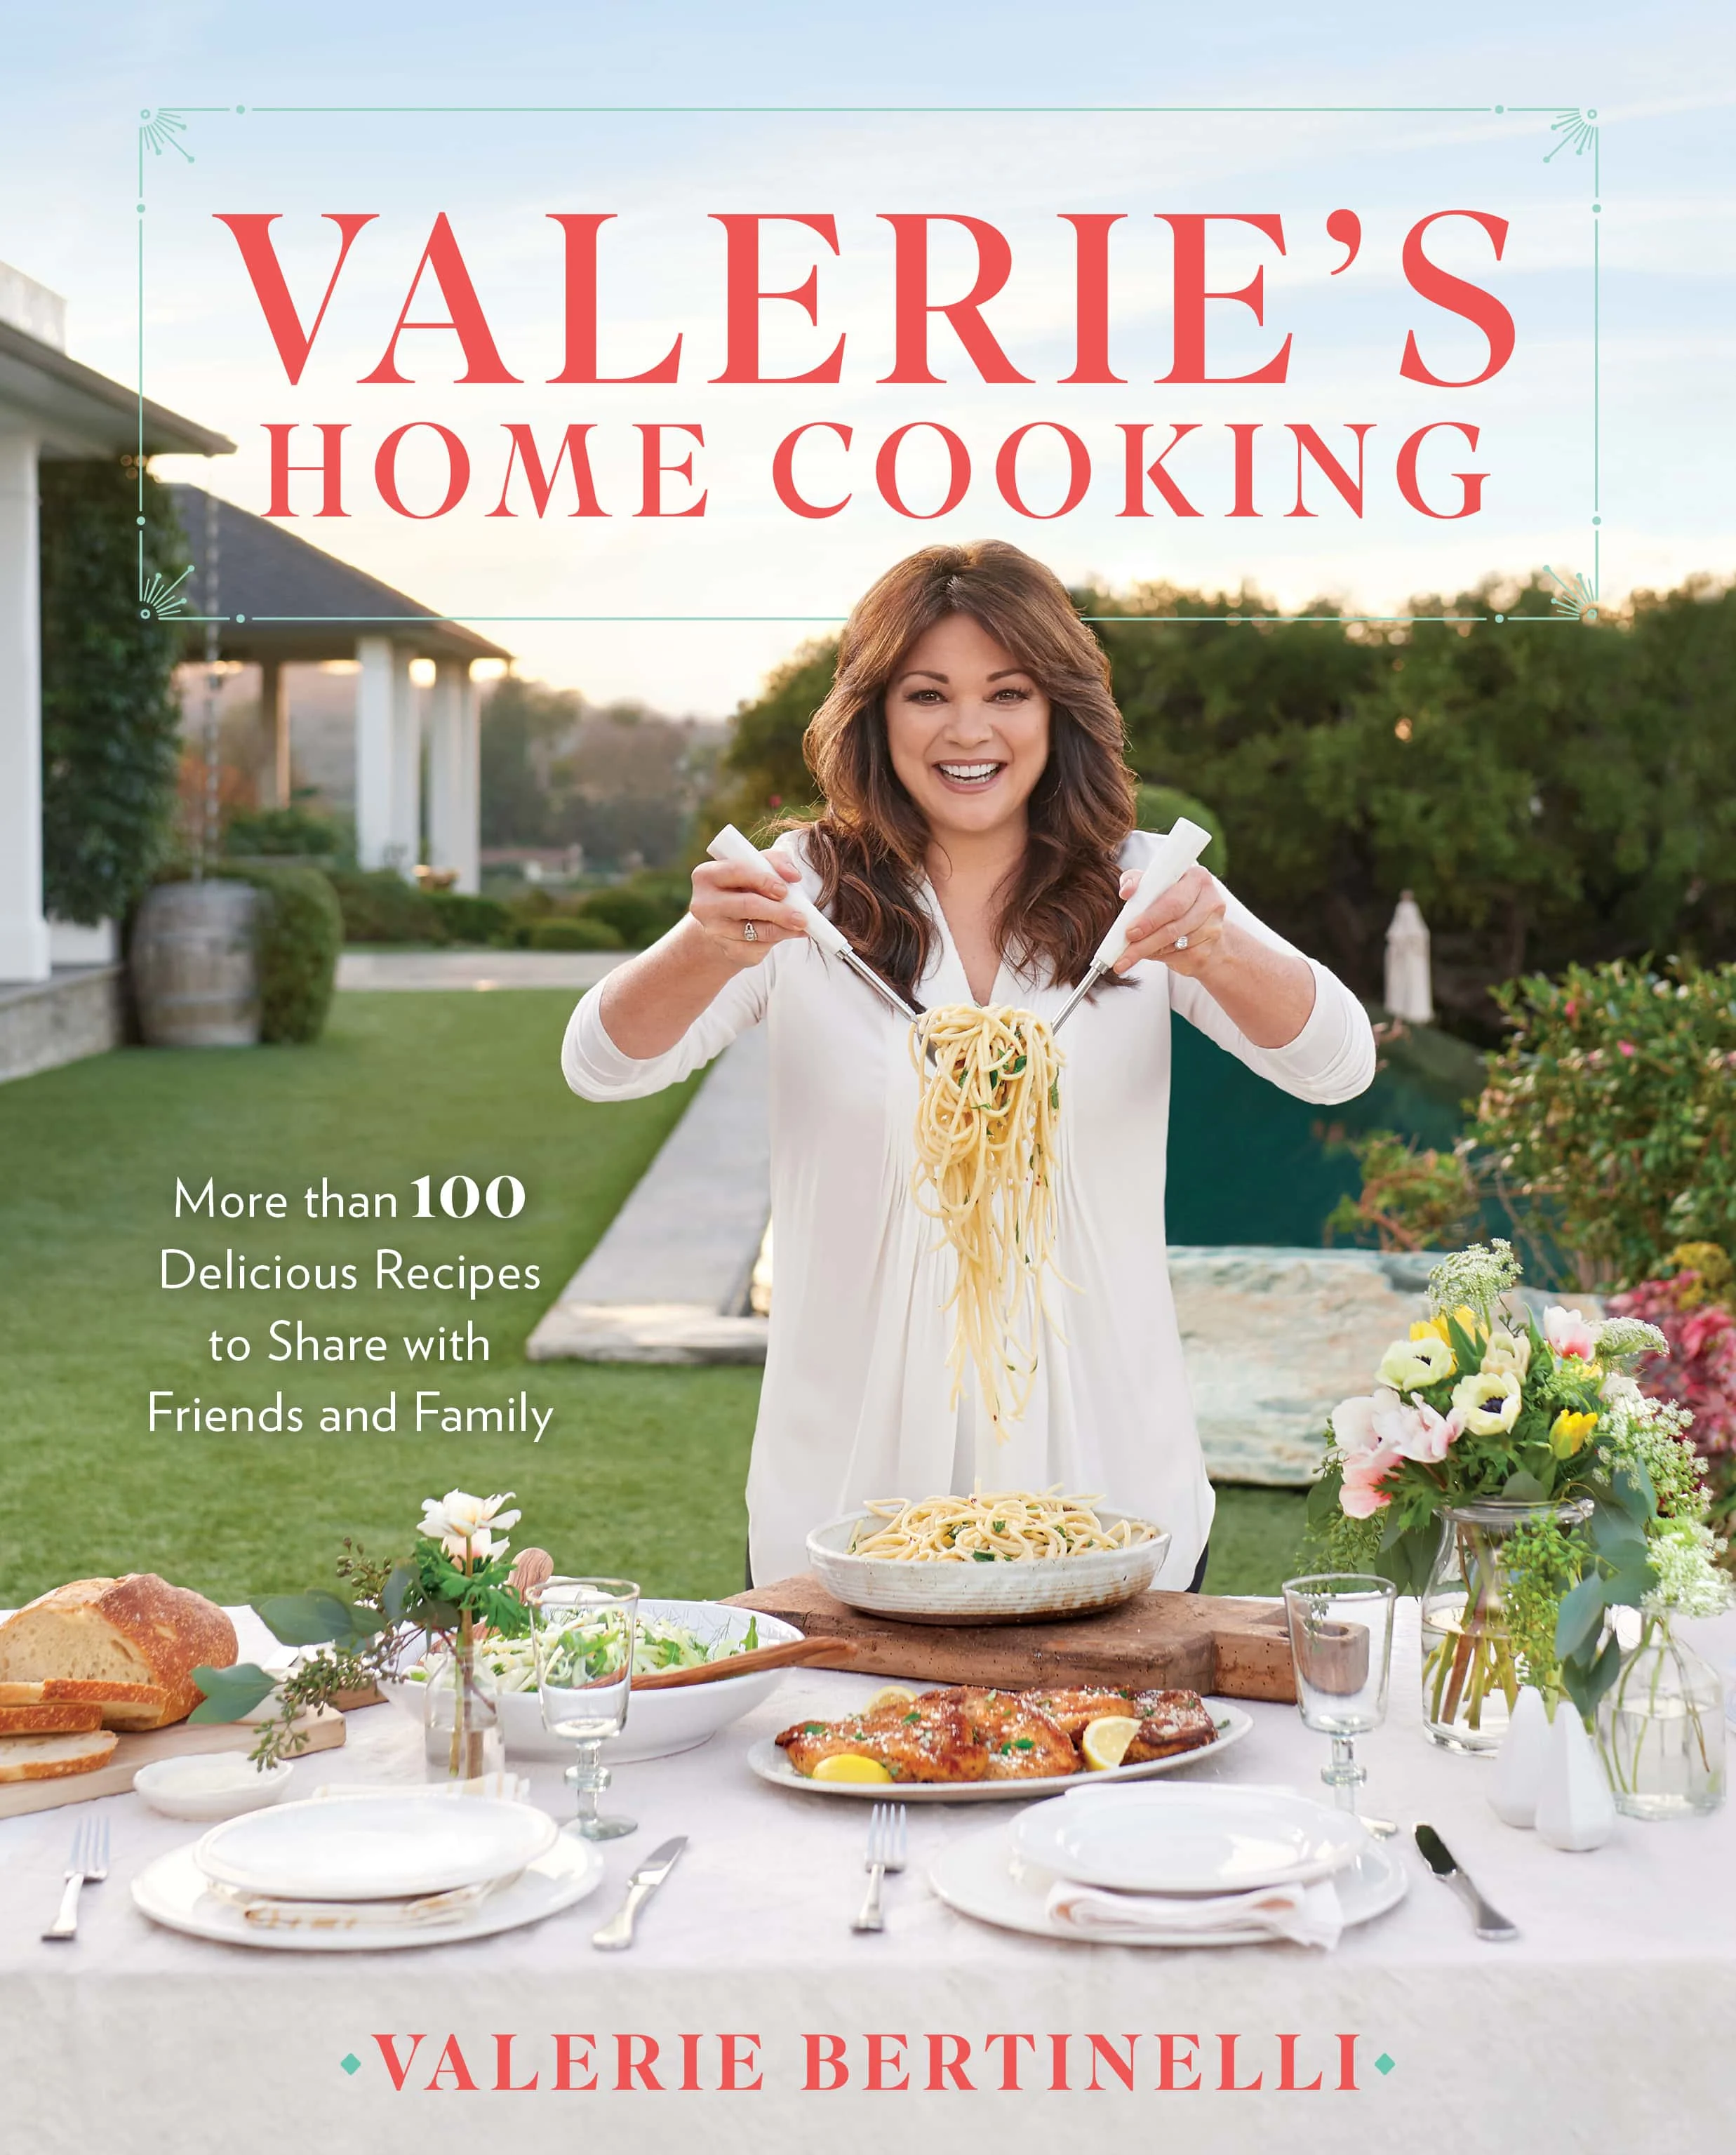 Valerie's Home Cooking Cookbook Cover